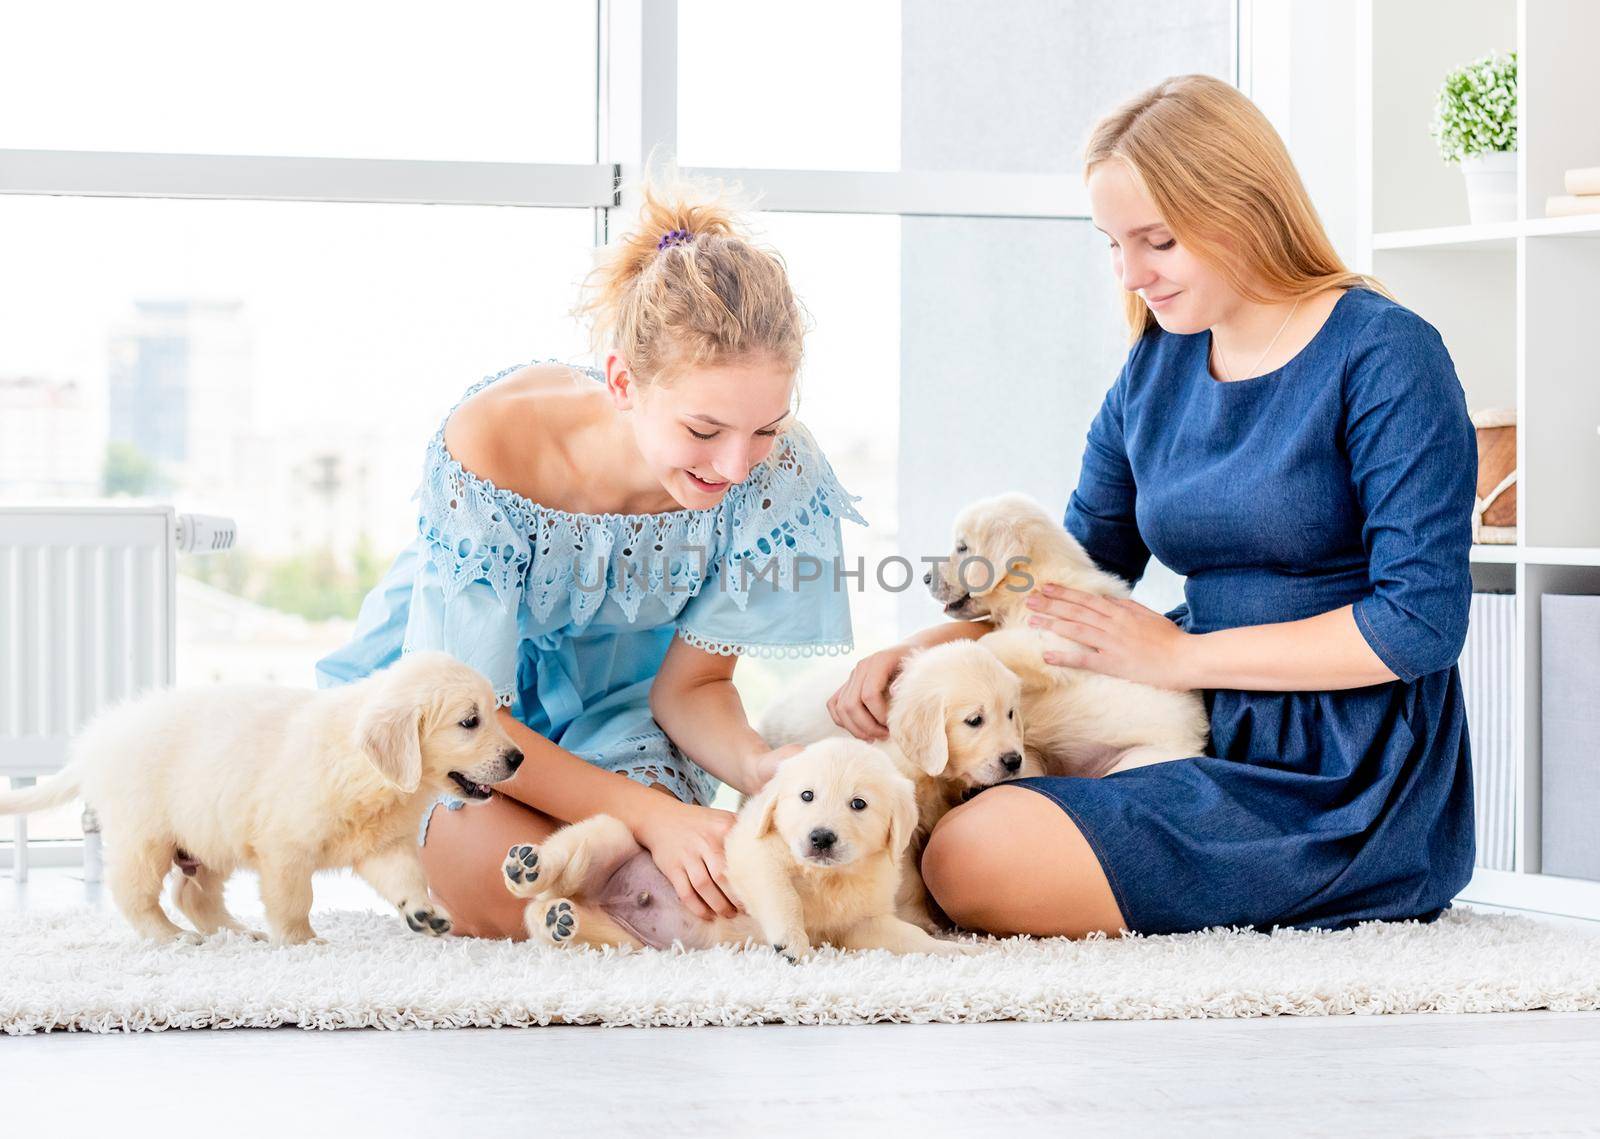 Girls playing with puppies by tan4ikk1